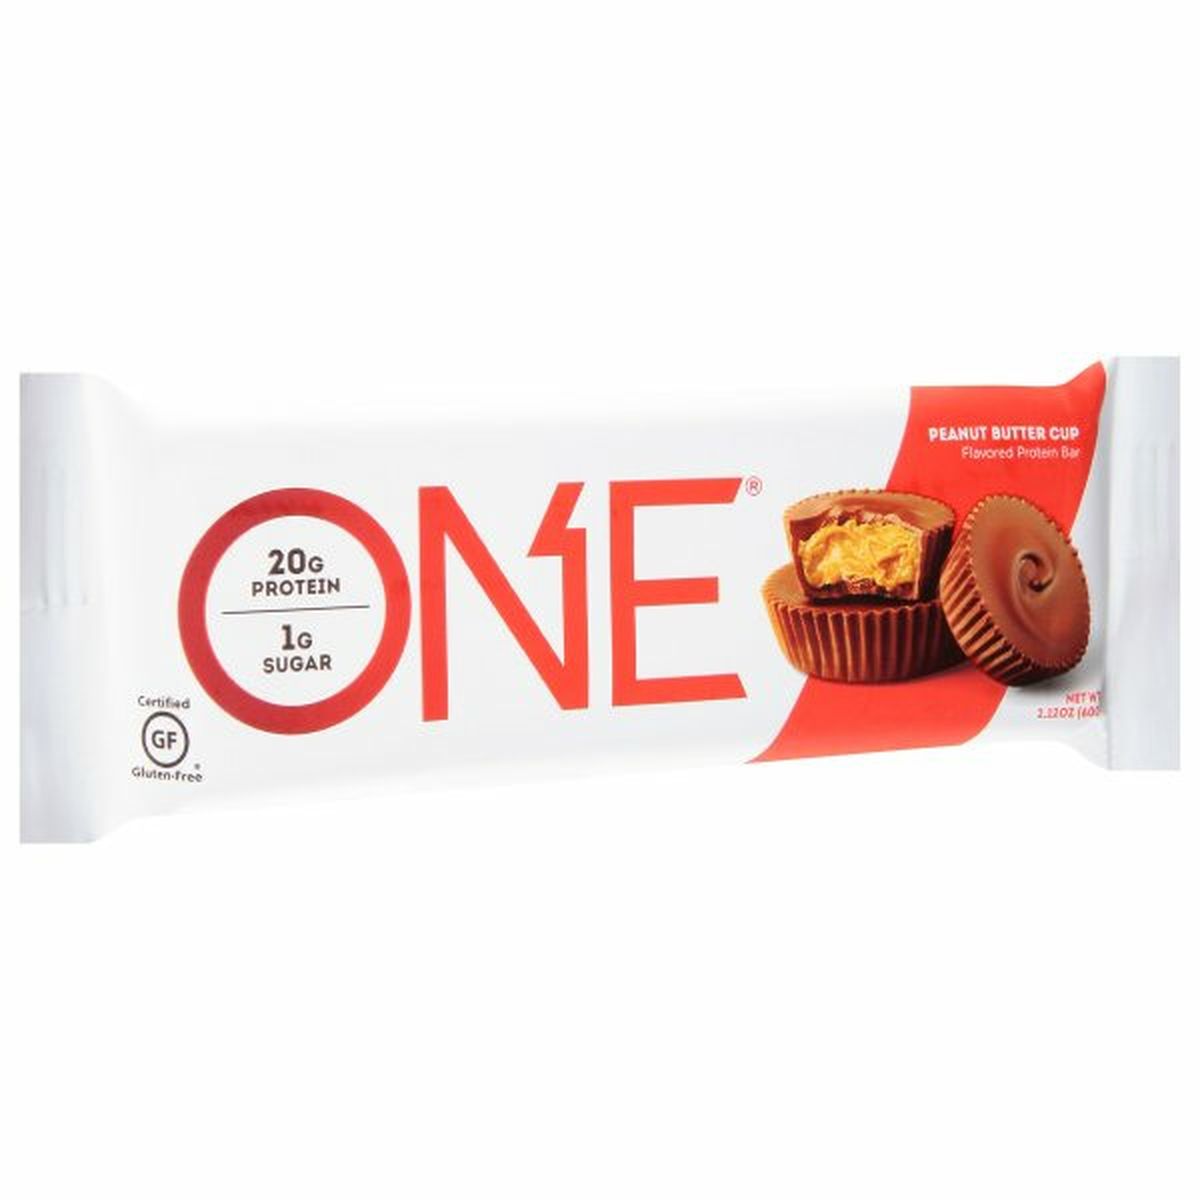 Calories in One Protein Bar, Peanut Butter Cup Flavored